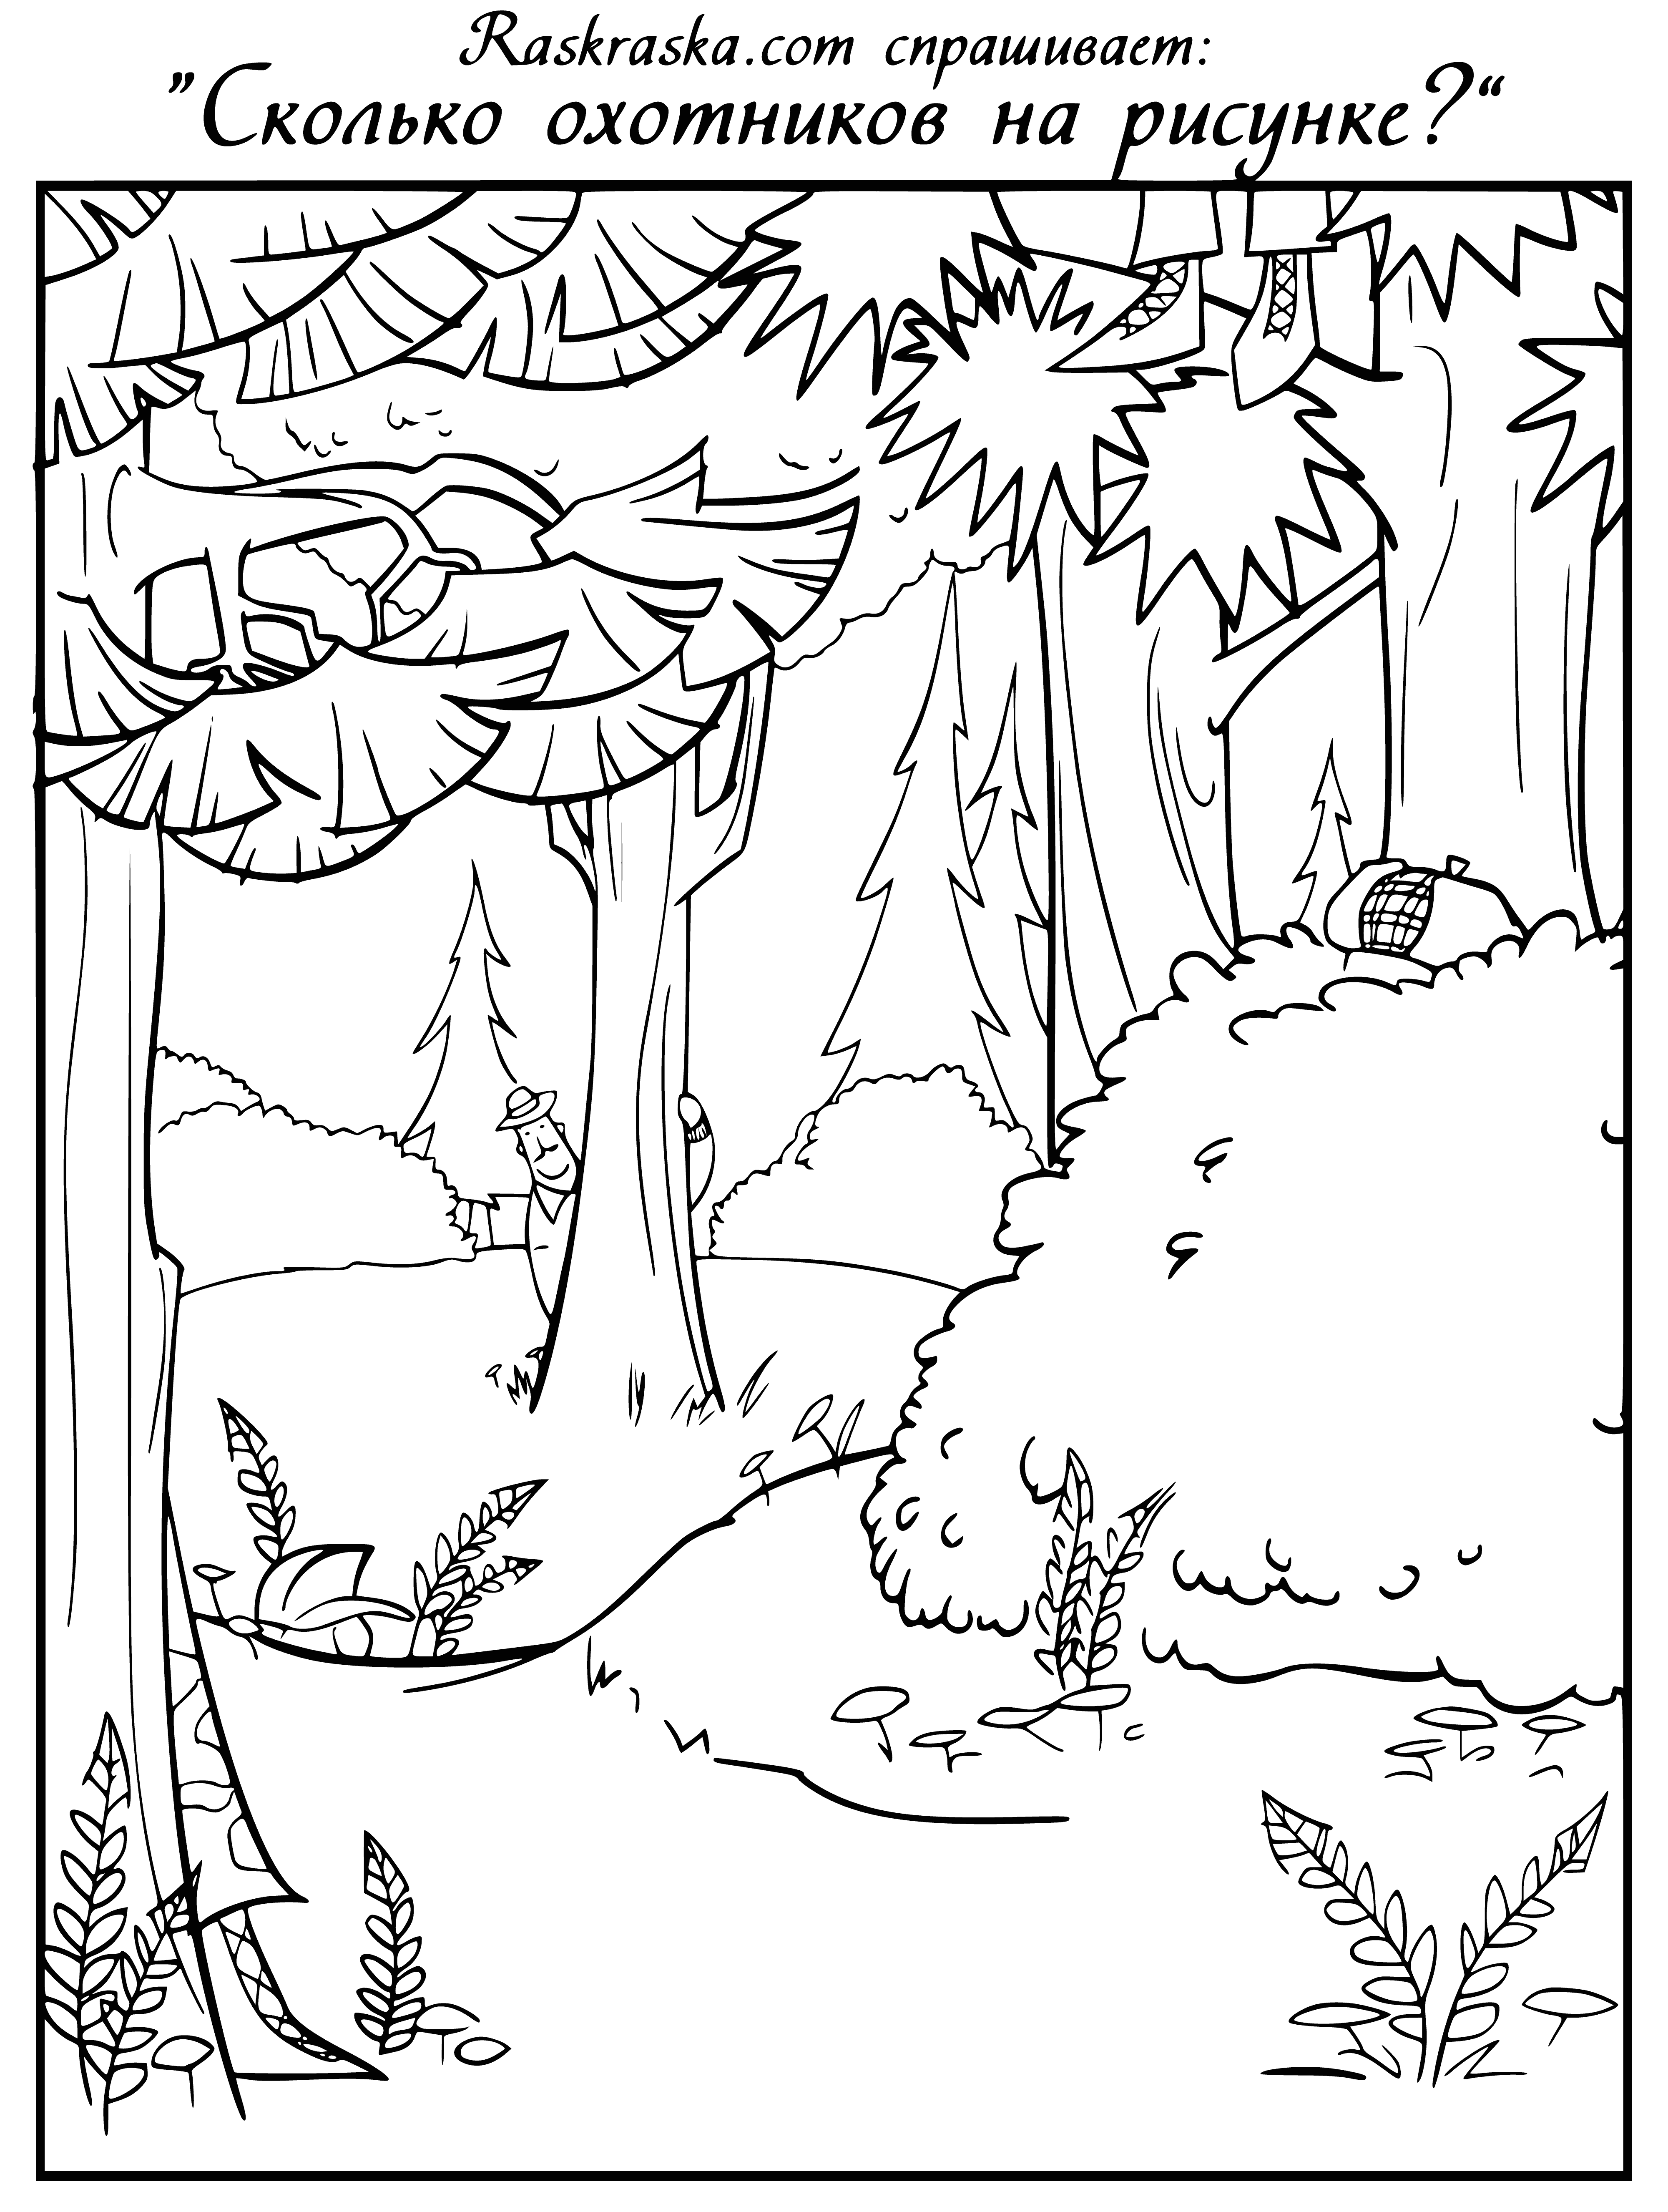 How many hunters? coloring page